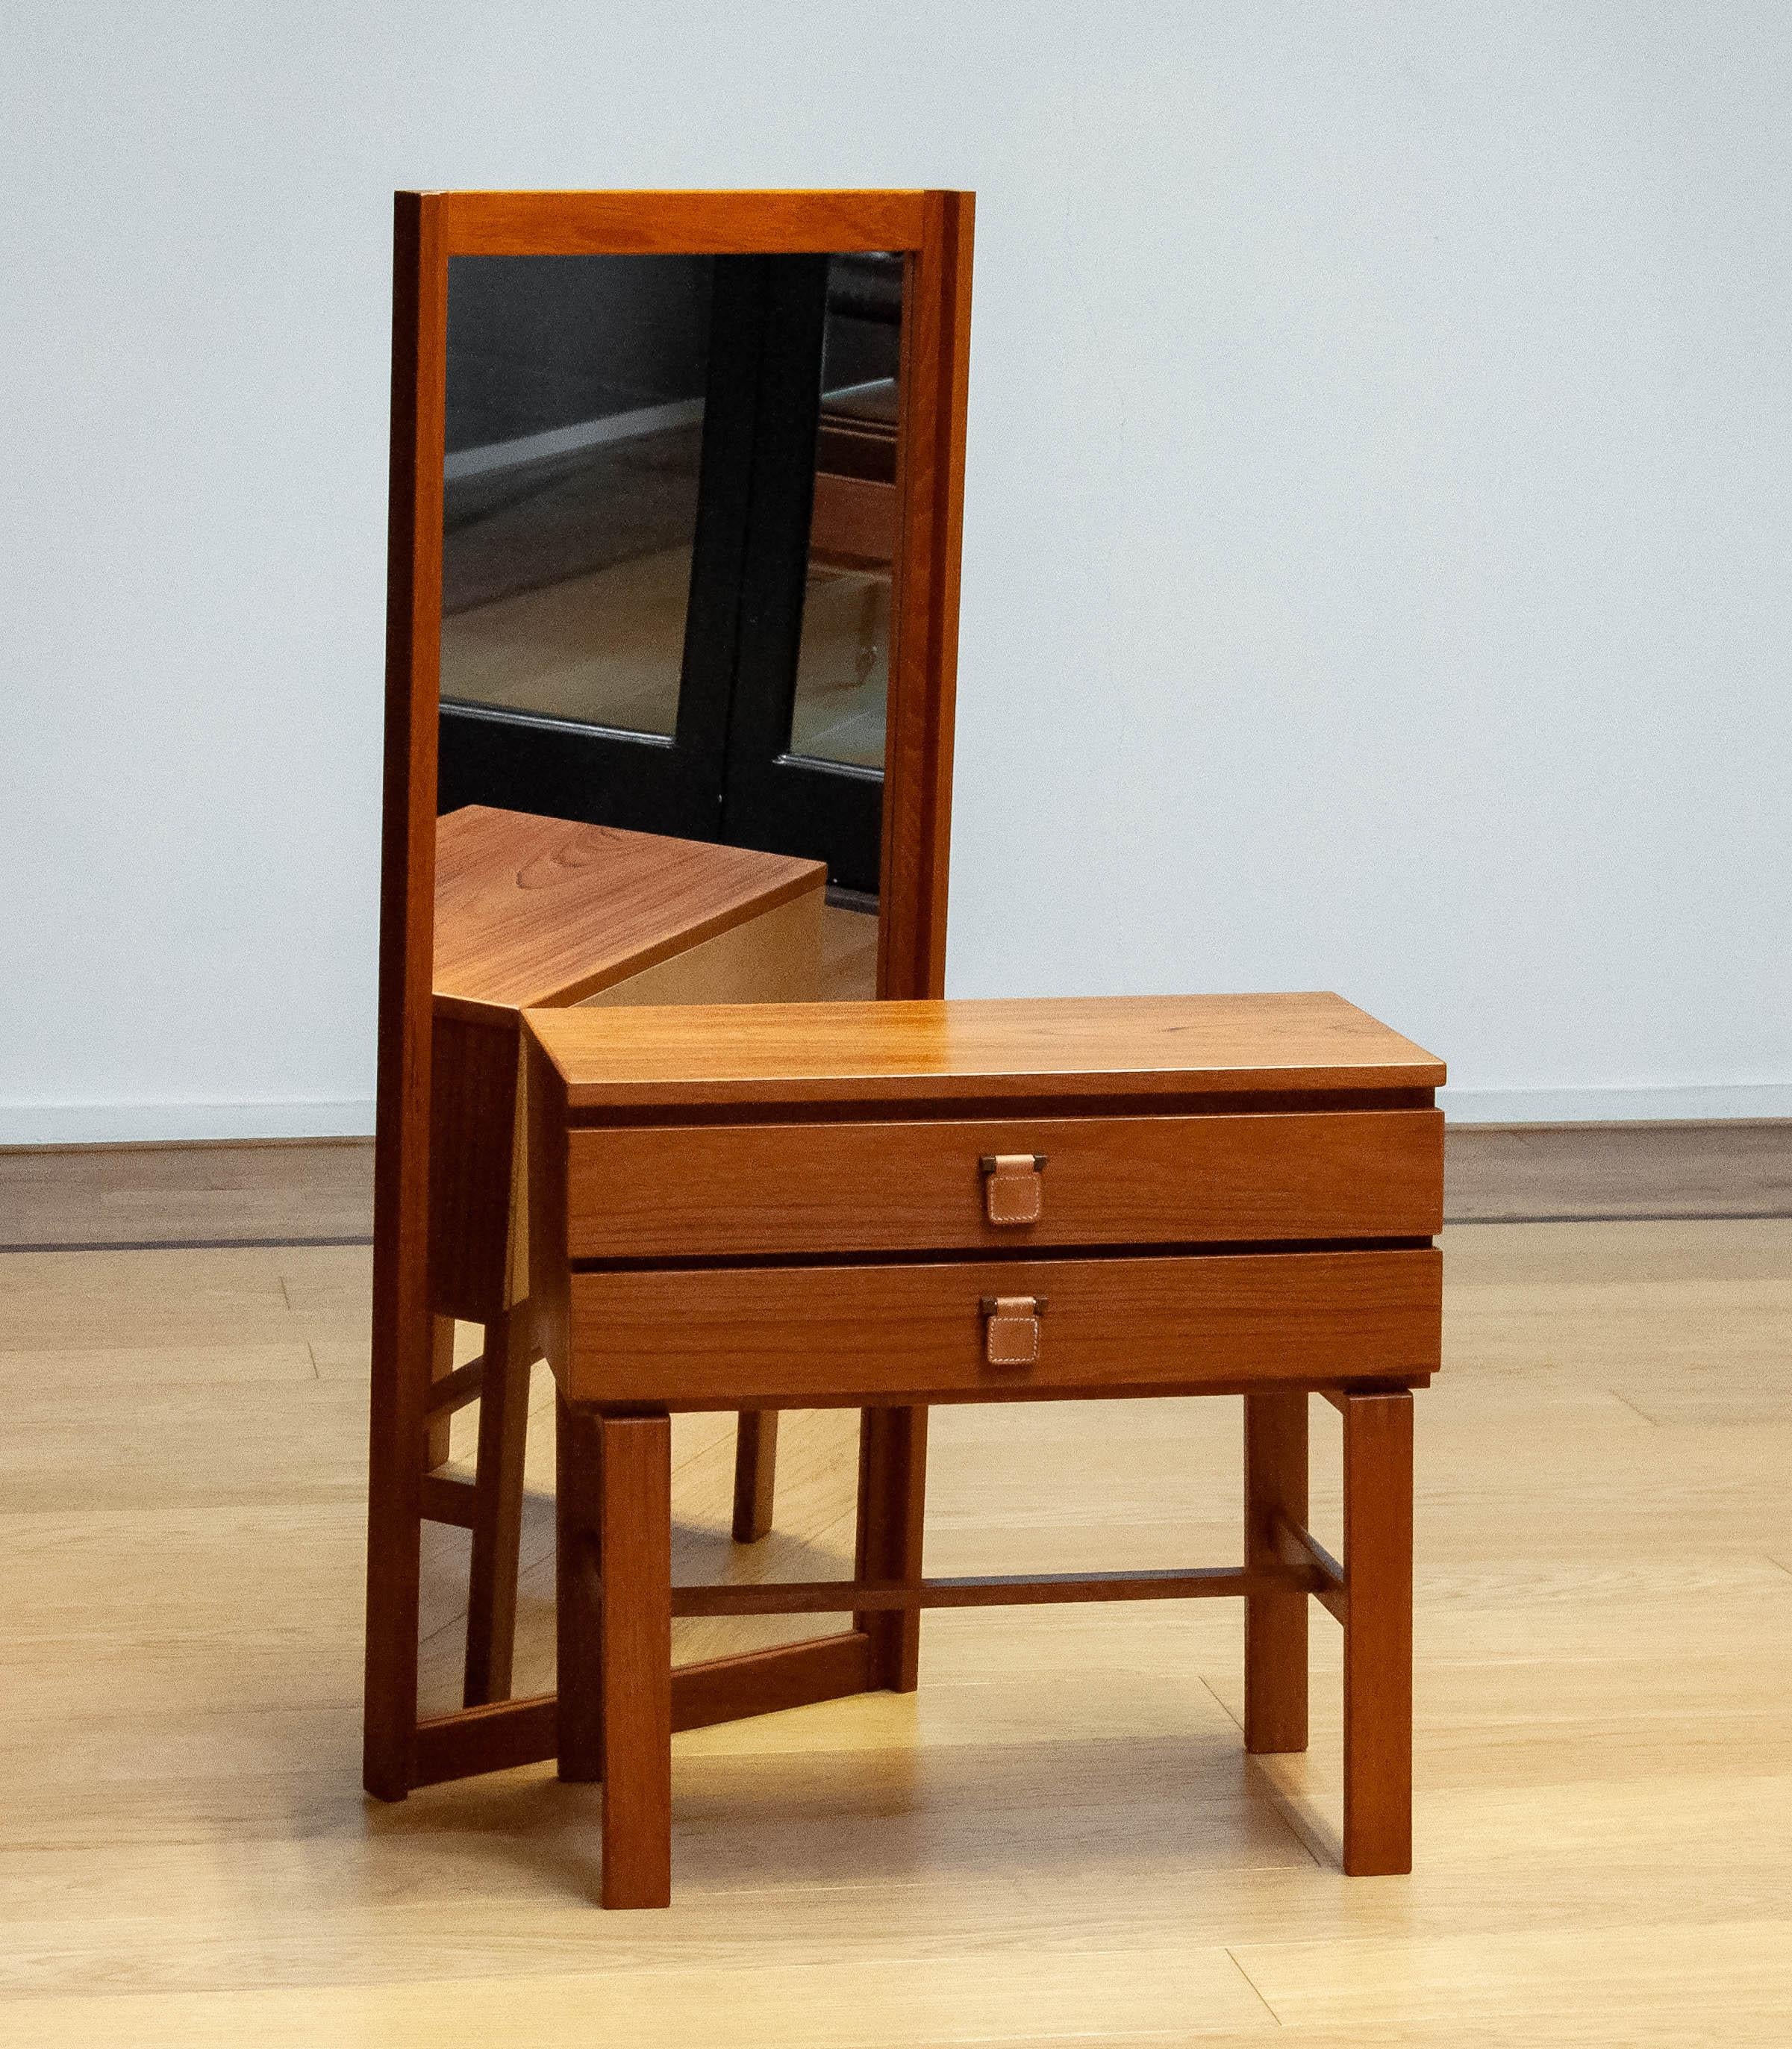 Beautiful Scandinavian Moderen chest with matching mirror from the Charmant series in teak designed by Sigurd Göransson for the manufacturer Fröseke Nibrofrabriken in Sweden, 
The cabinet has two drawers both with brass and leather hangings. The